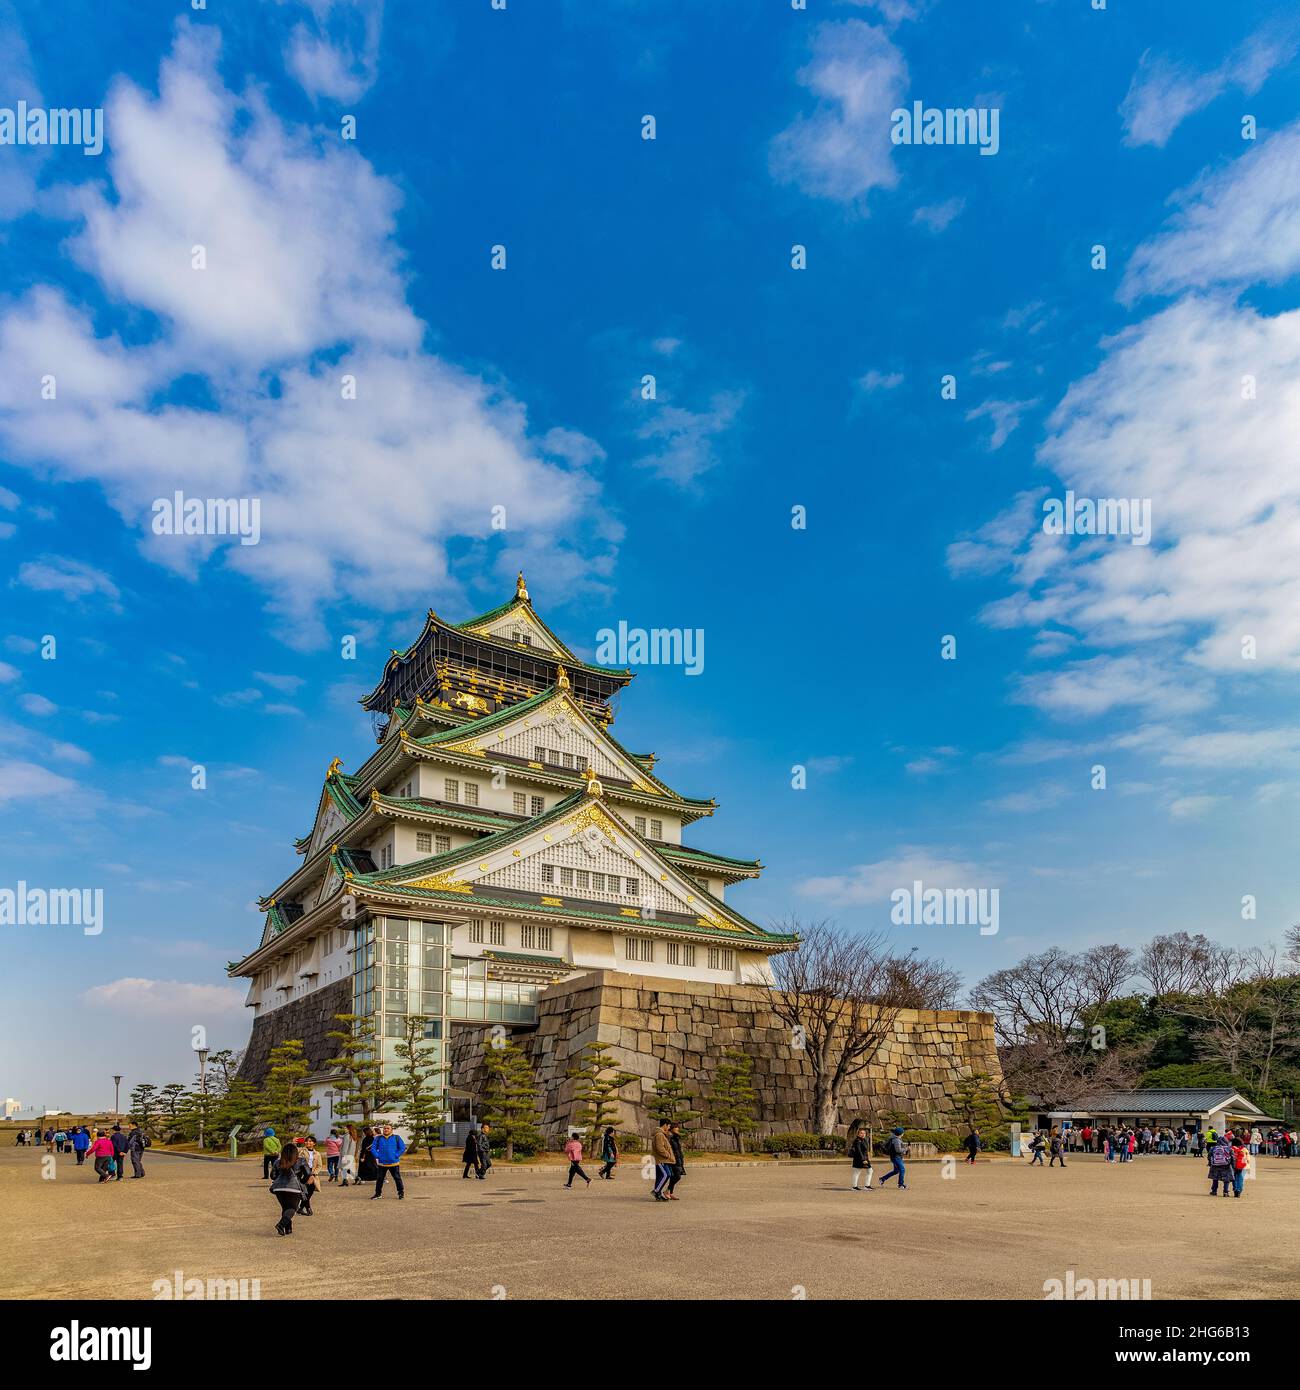 A picture of the Osaka Castle and the square around it. Stock Photo